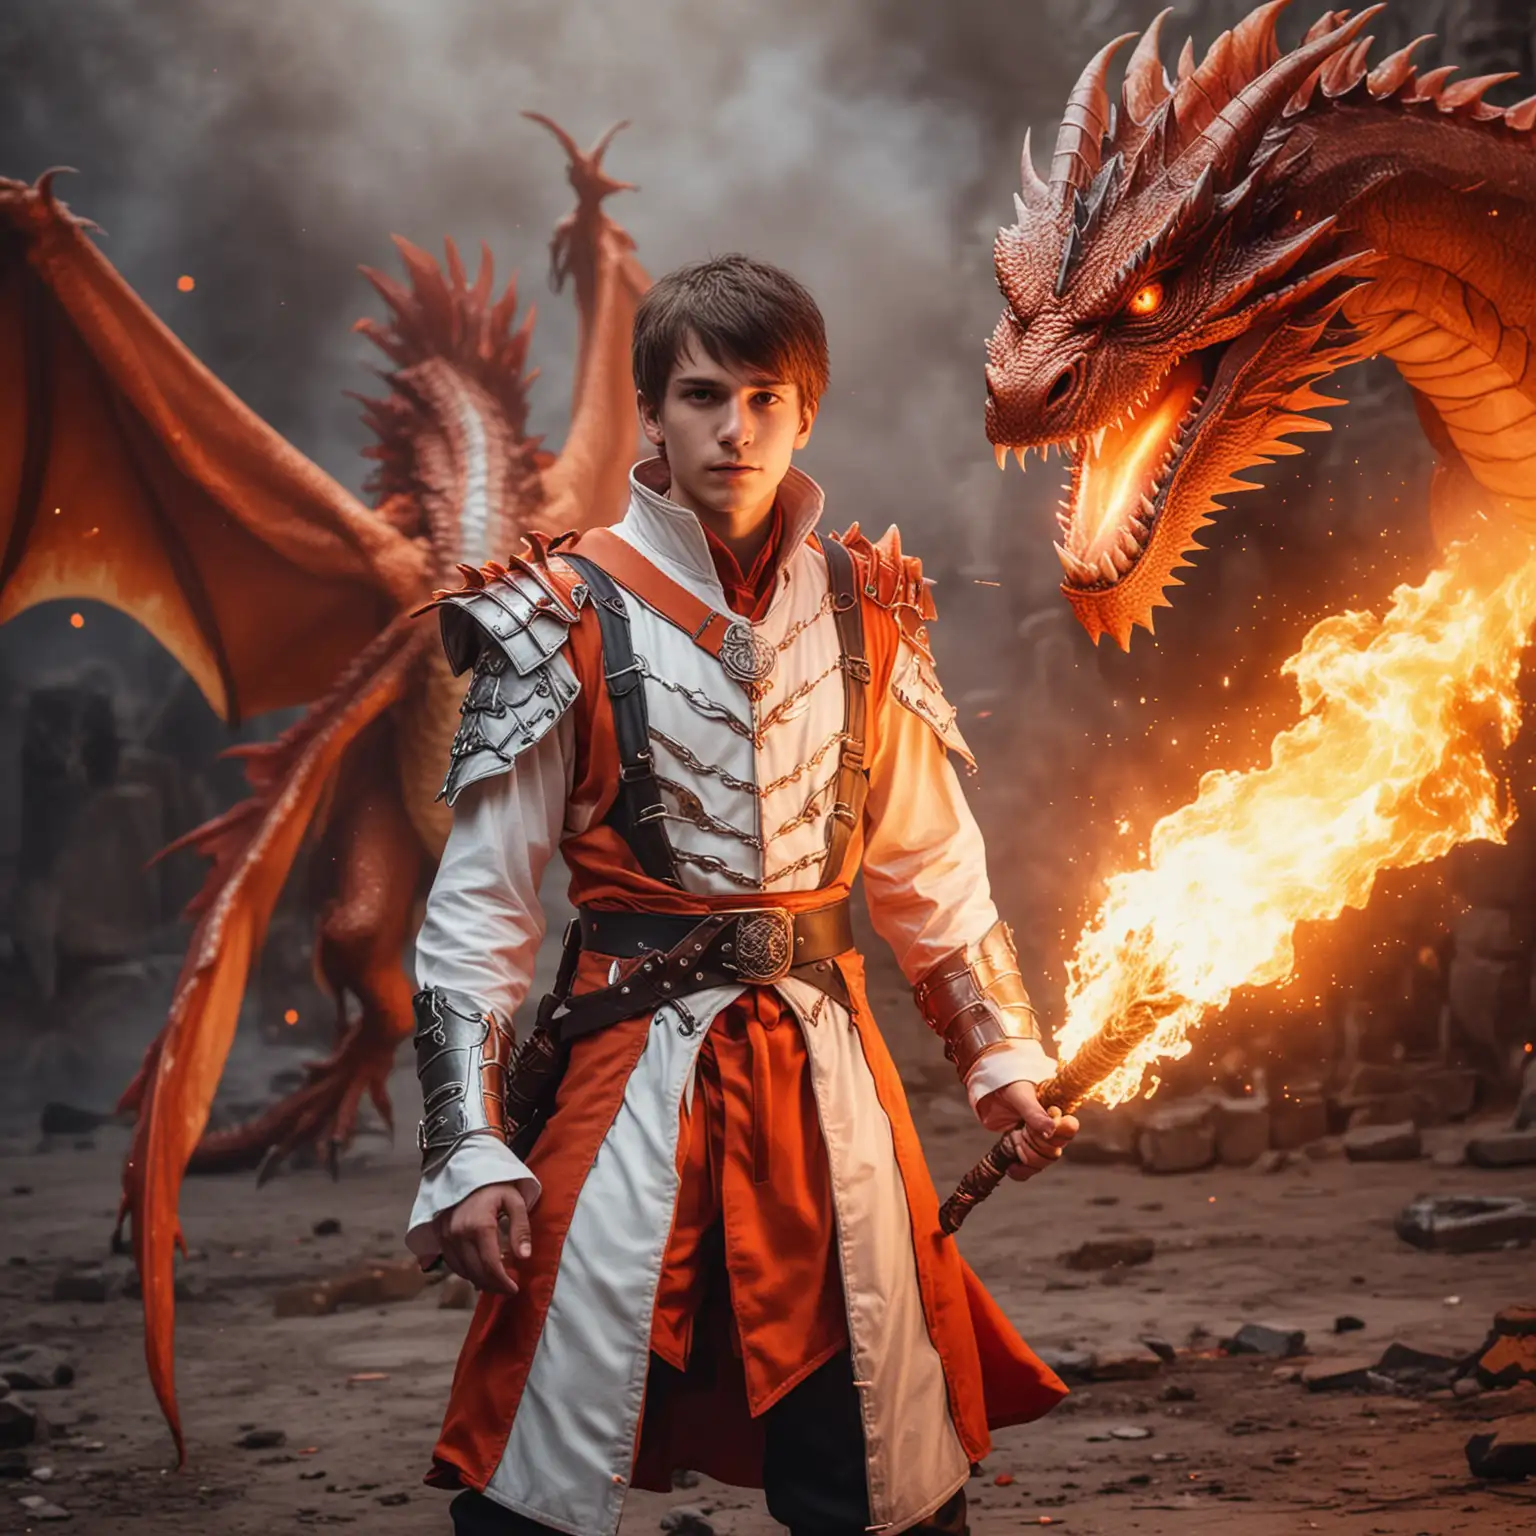 Fiery-Wizard-Summoning-Dragon-Enigmatic-19YearOld-Mage-in-Red-White-and-Orange-Flames